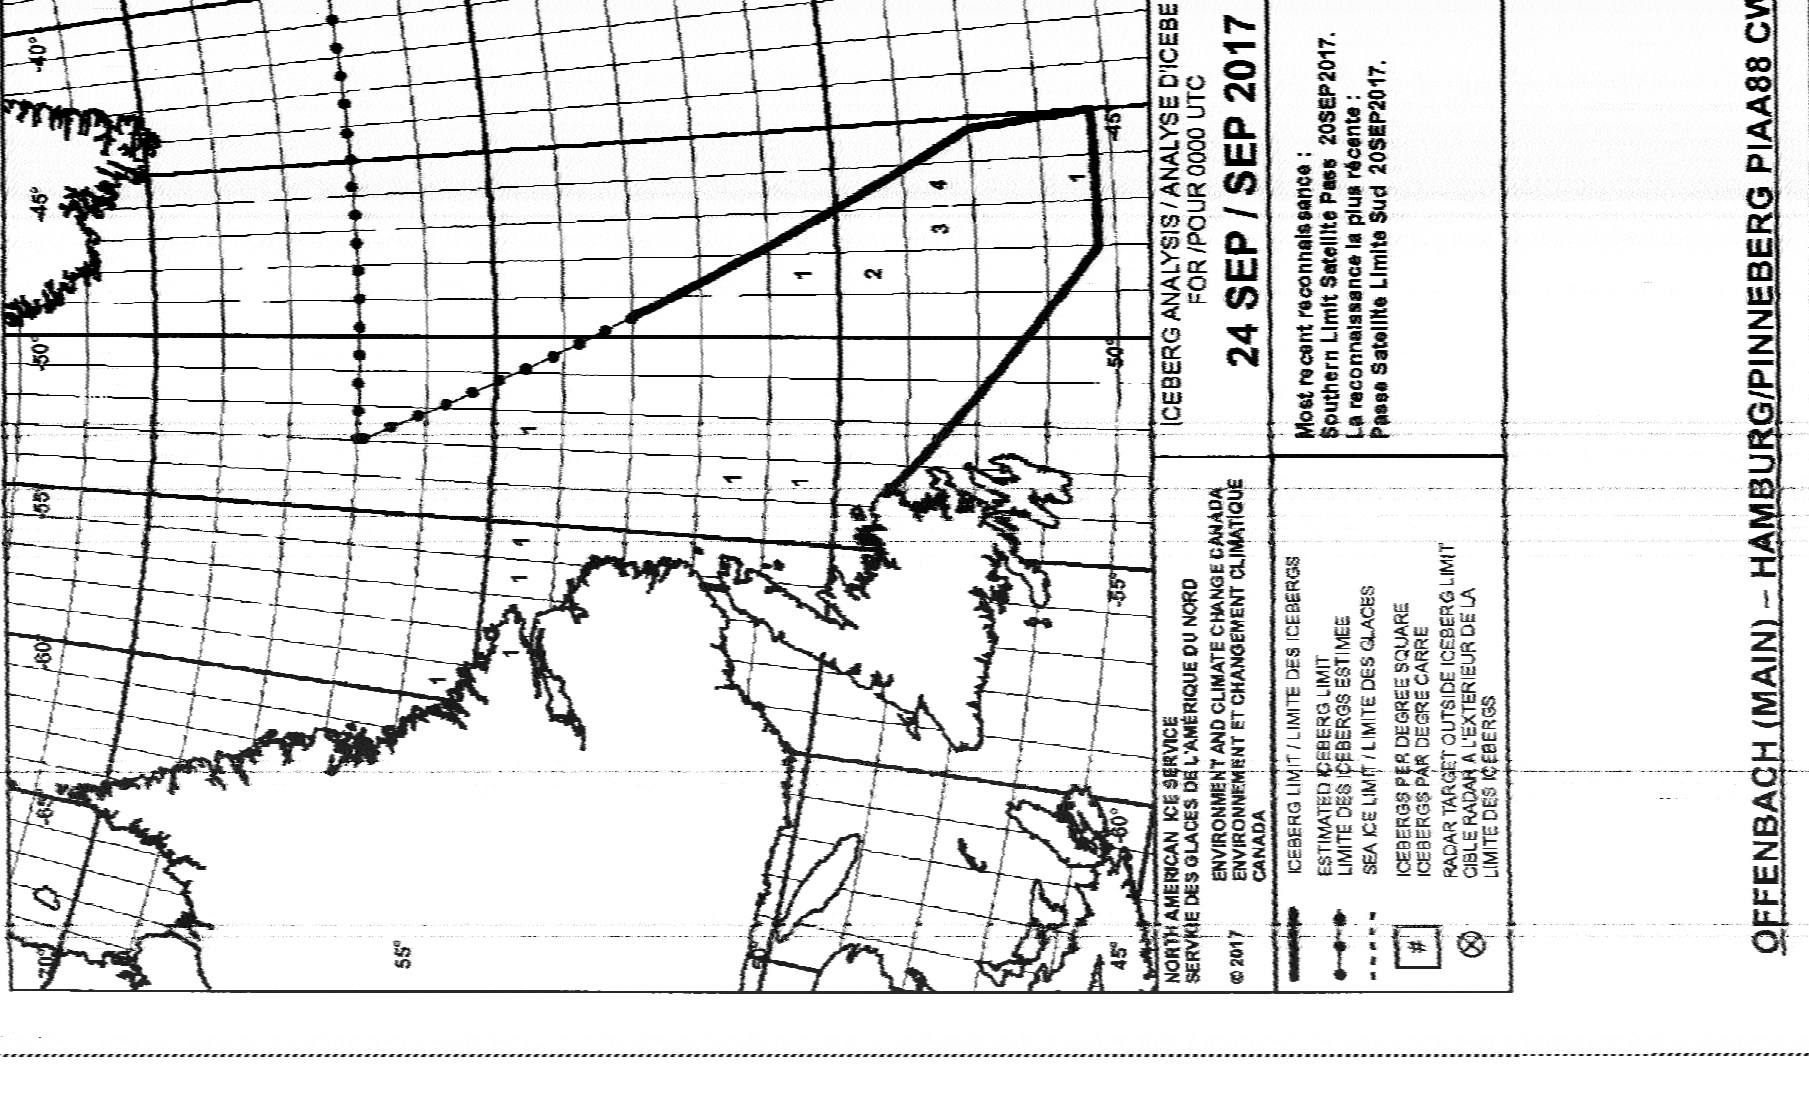 wefax_20170924_181936_14071090_ok.png